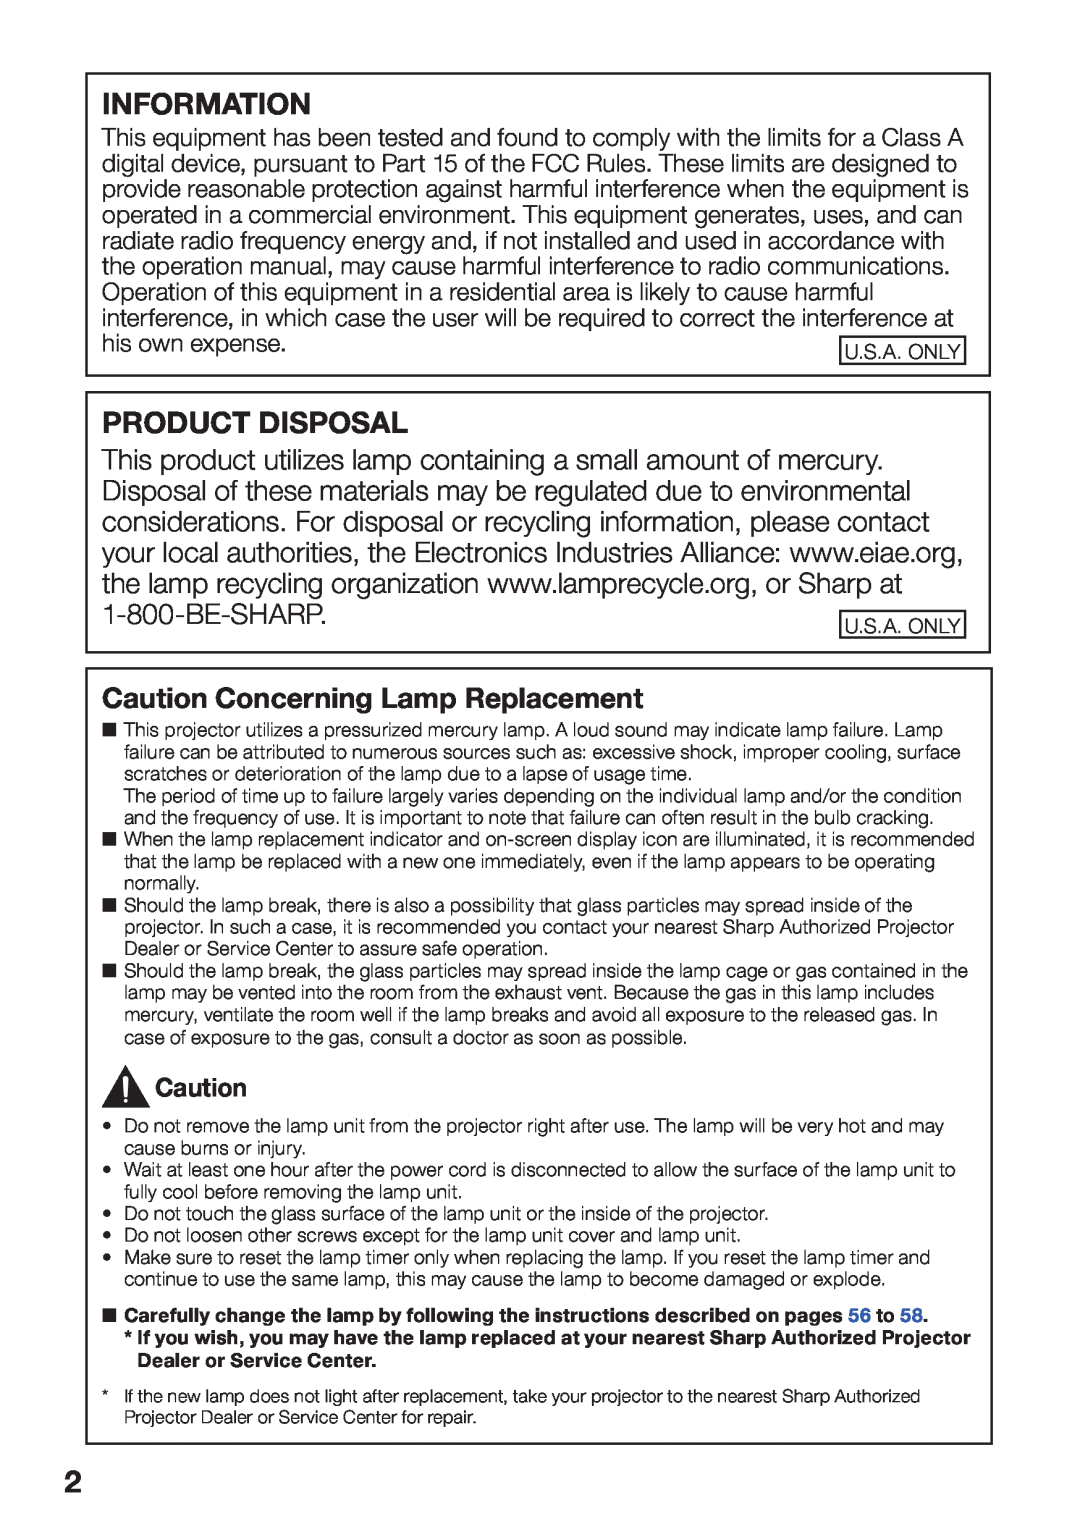 Sharp PG-LW2000, PGLW2000 appendix Information, Product Disposal, Caution Concerning Lamp Replacement 